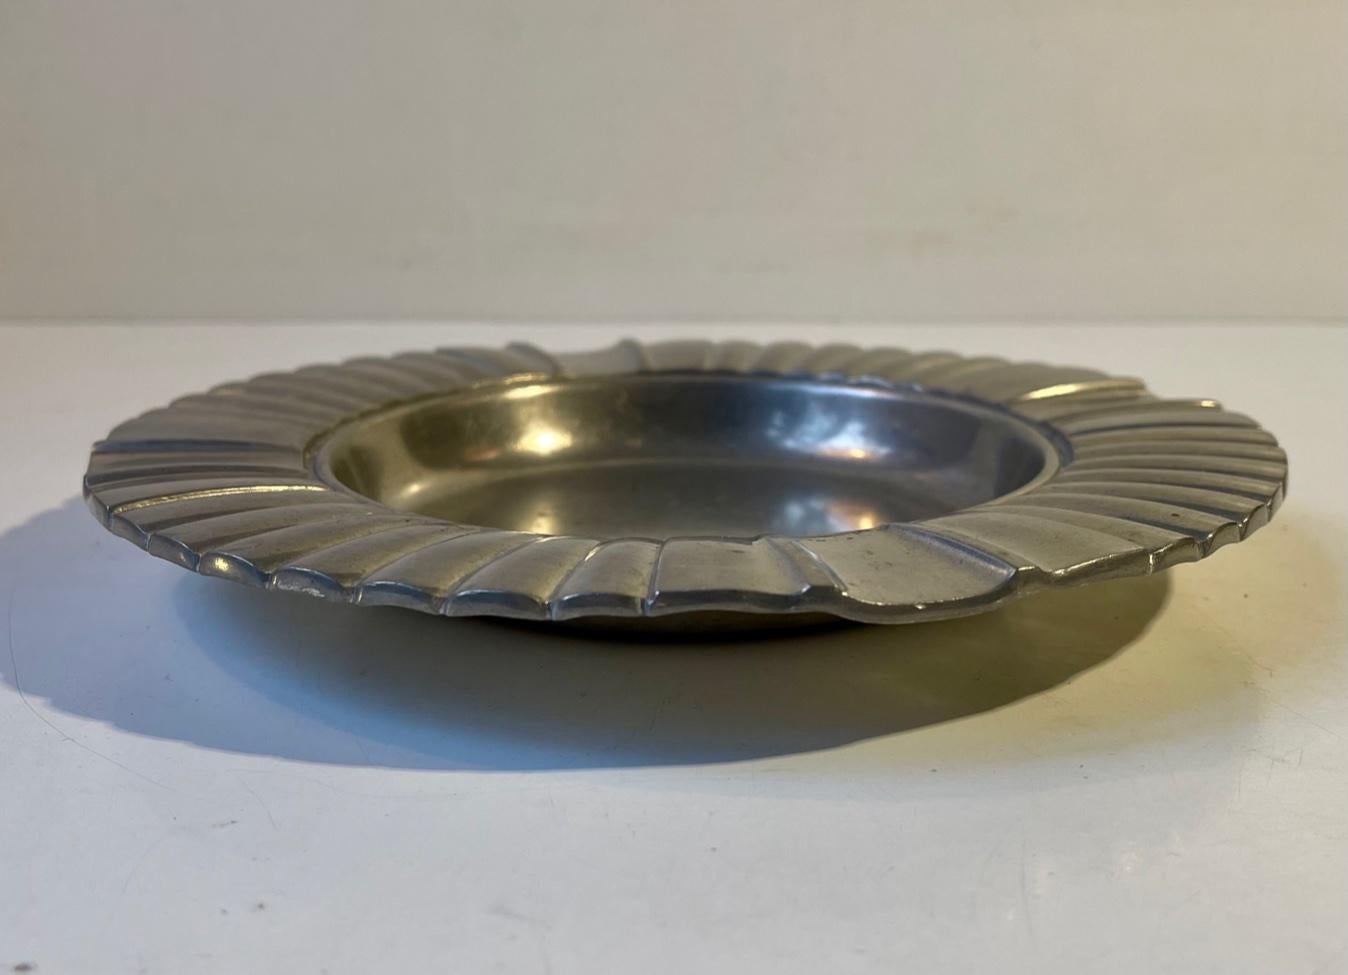 A rare pewter bowl or ashtray with architecturally styled ribbings. Designed and manufactured by Just Andersen in Denmark during the 1930s. Imprinted to its base: Just, Danmark, 2350. Measurements: H: 3 cm, D: 21 cm.